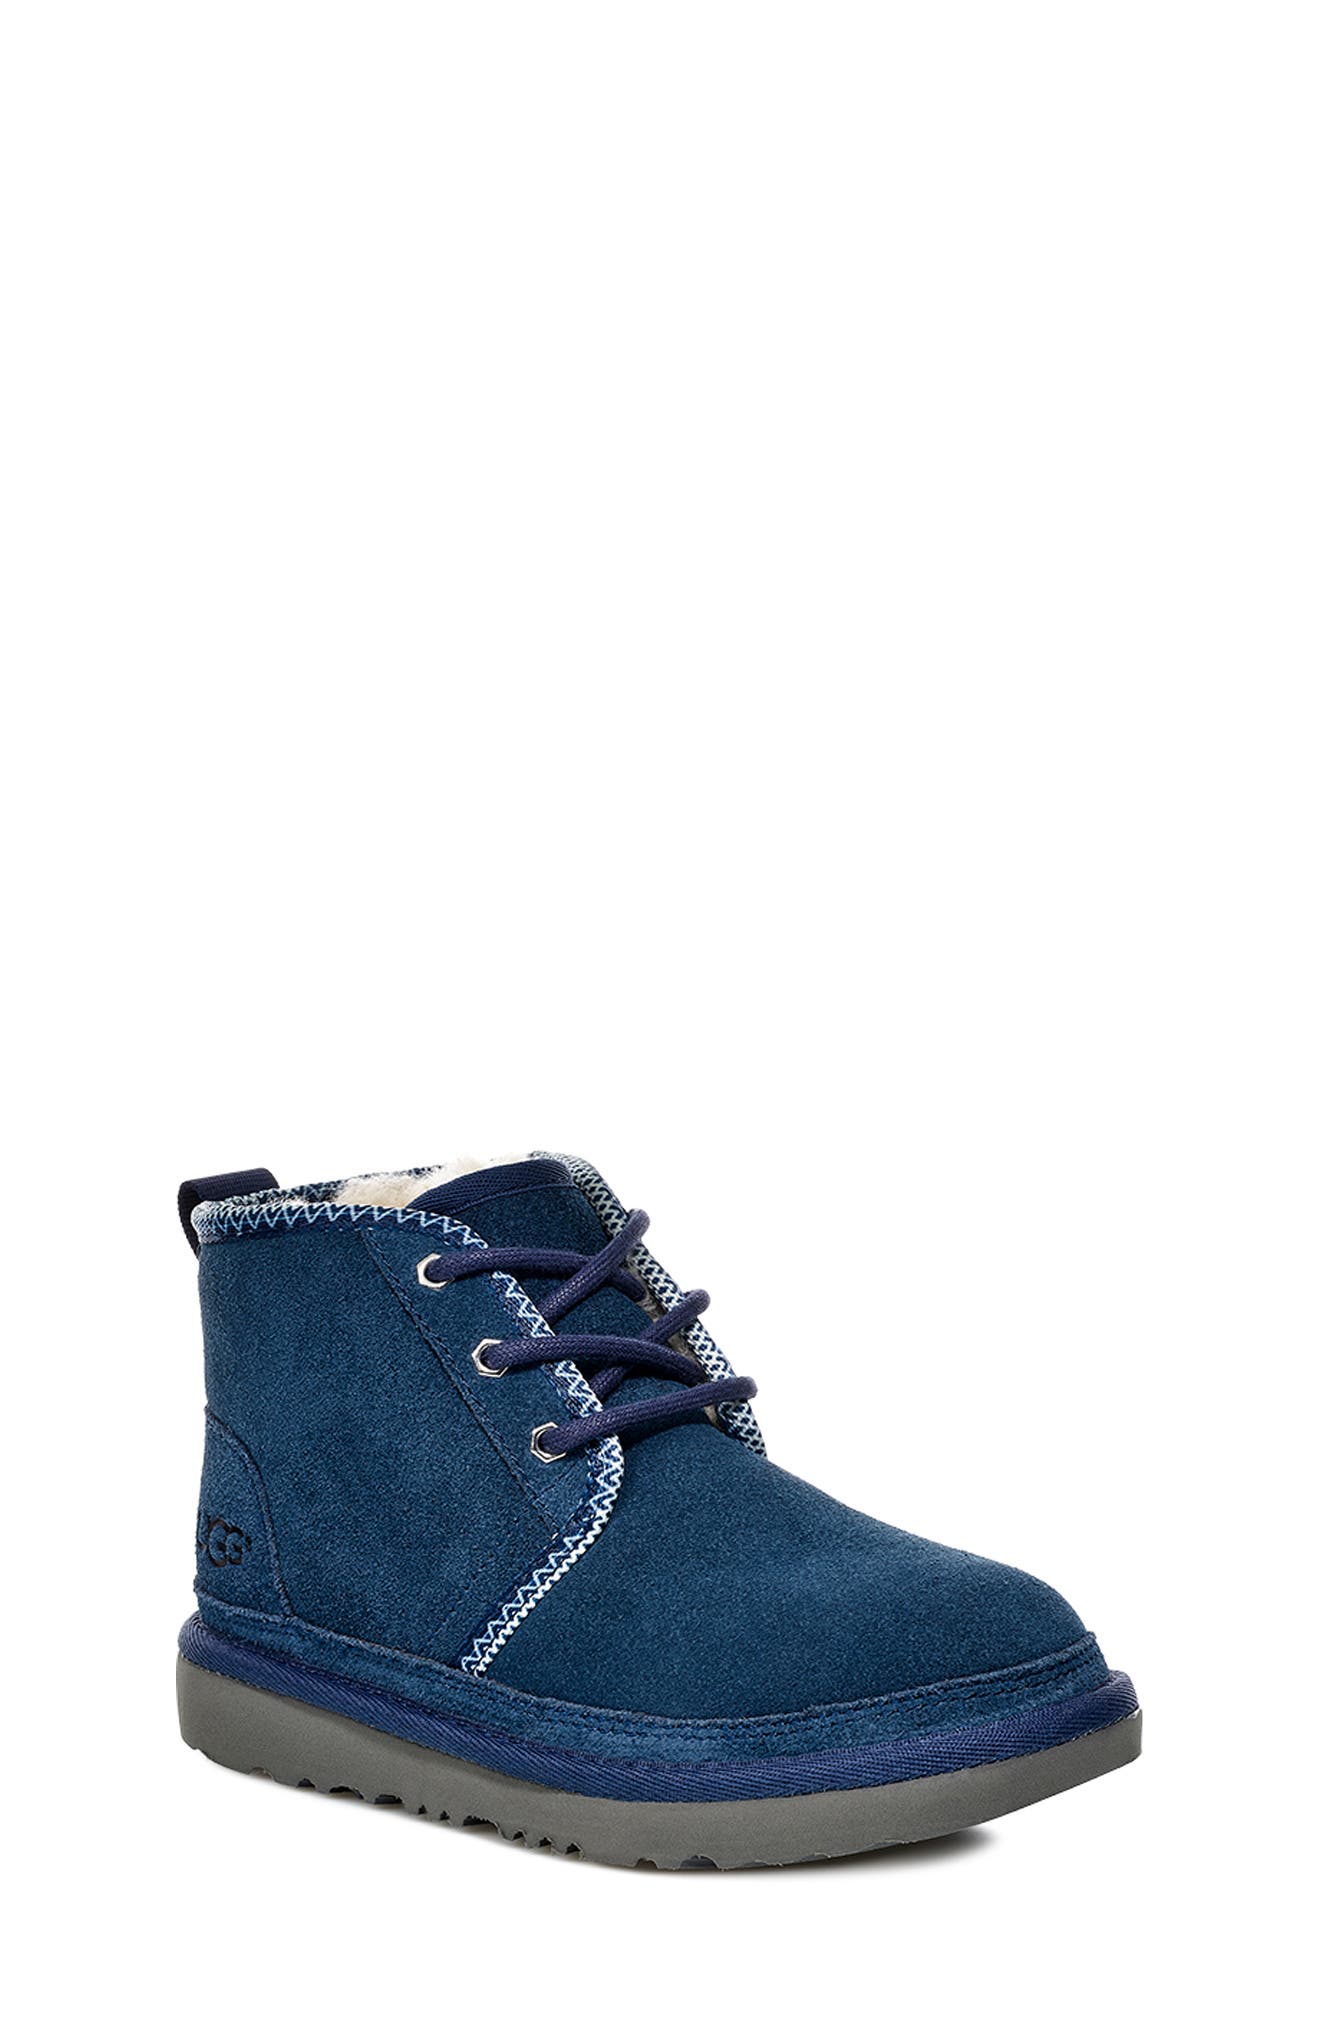 navy blue and white neumel uggs